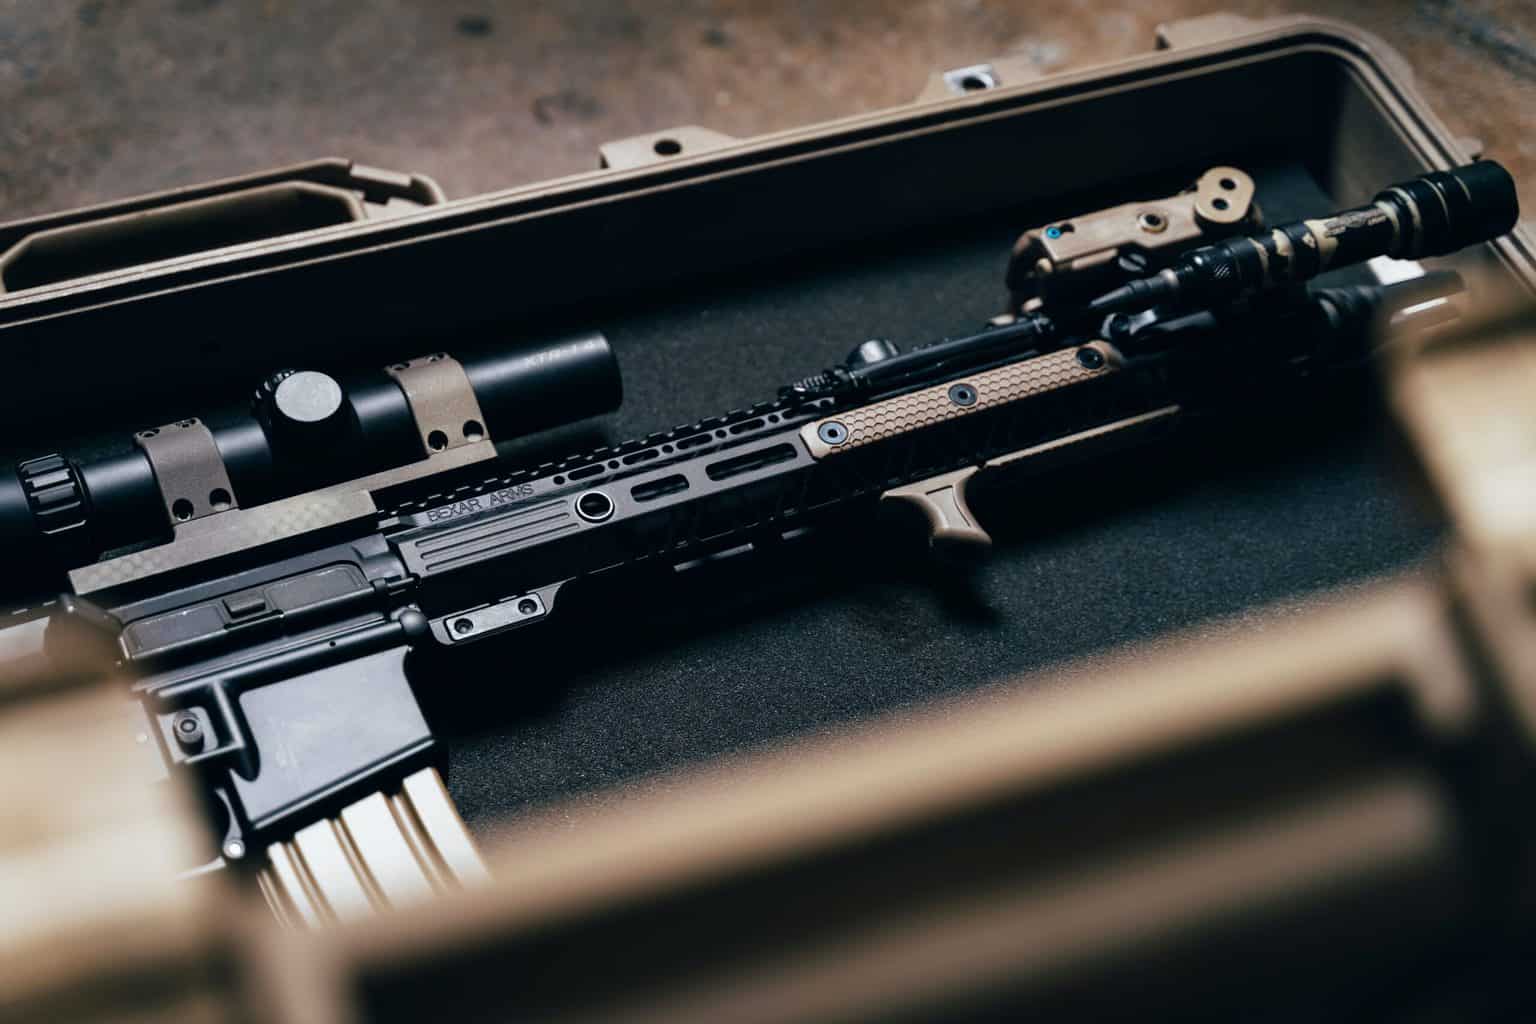 Rifle with a scope inside a case